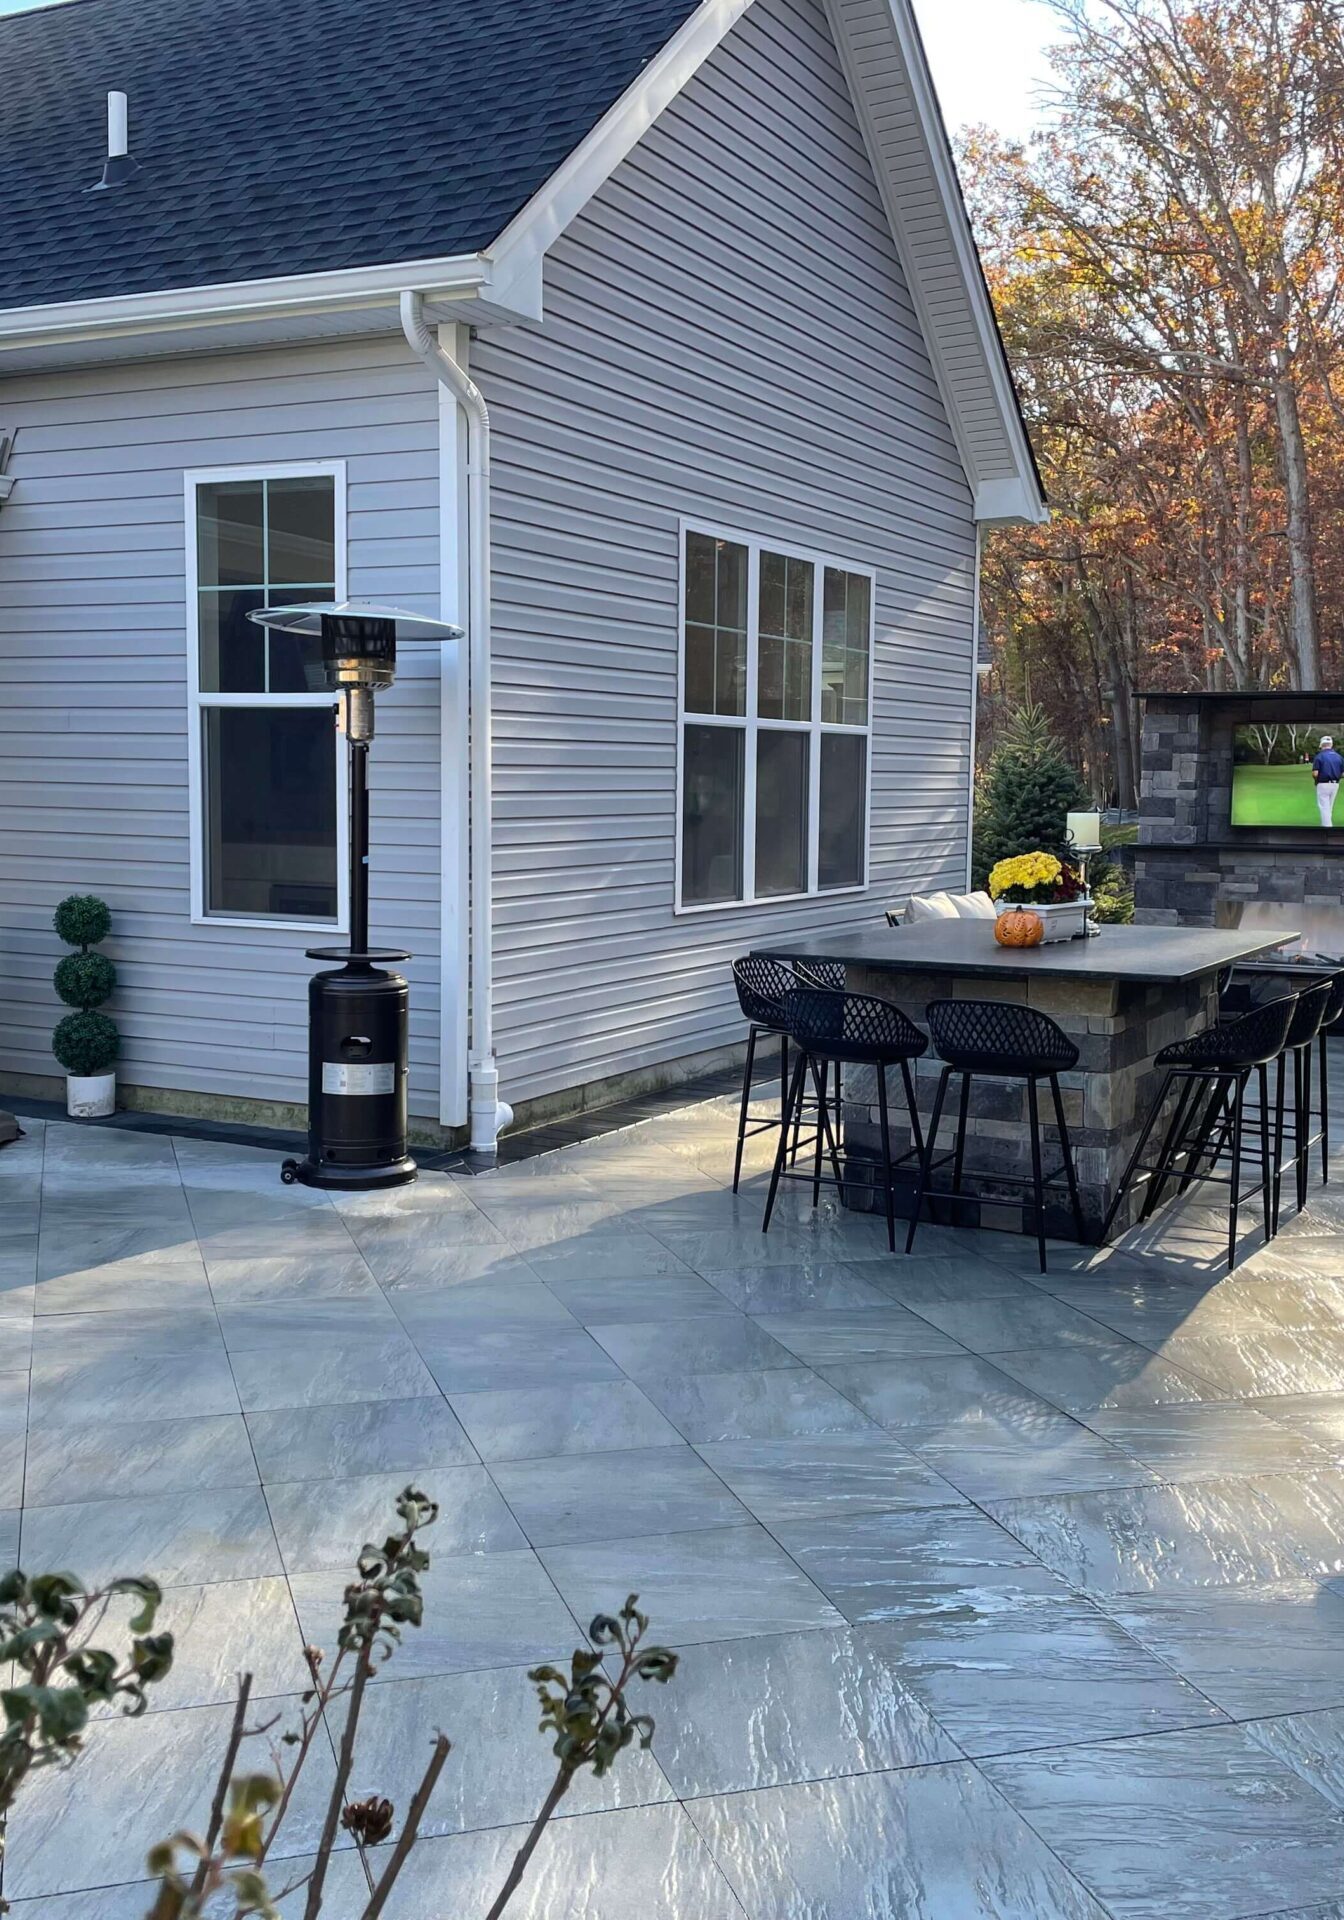 Ocean Township, NJ Landscaping Services